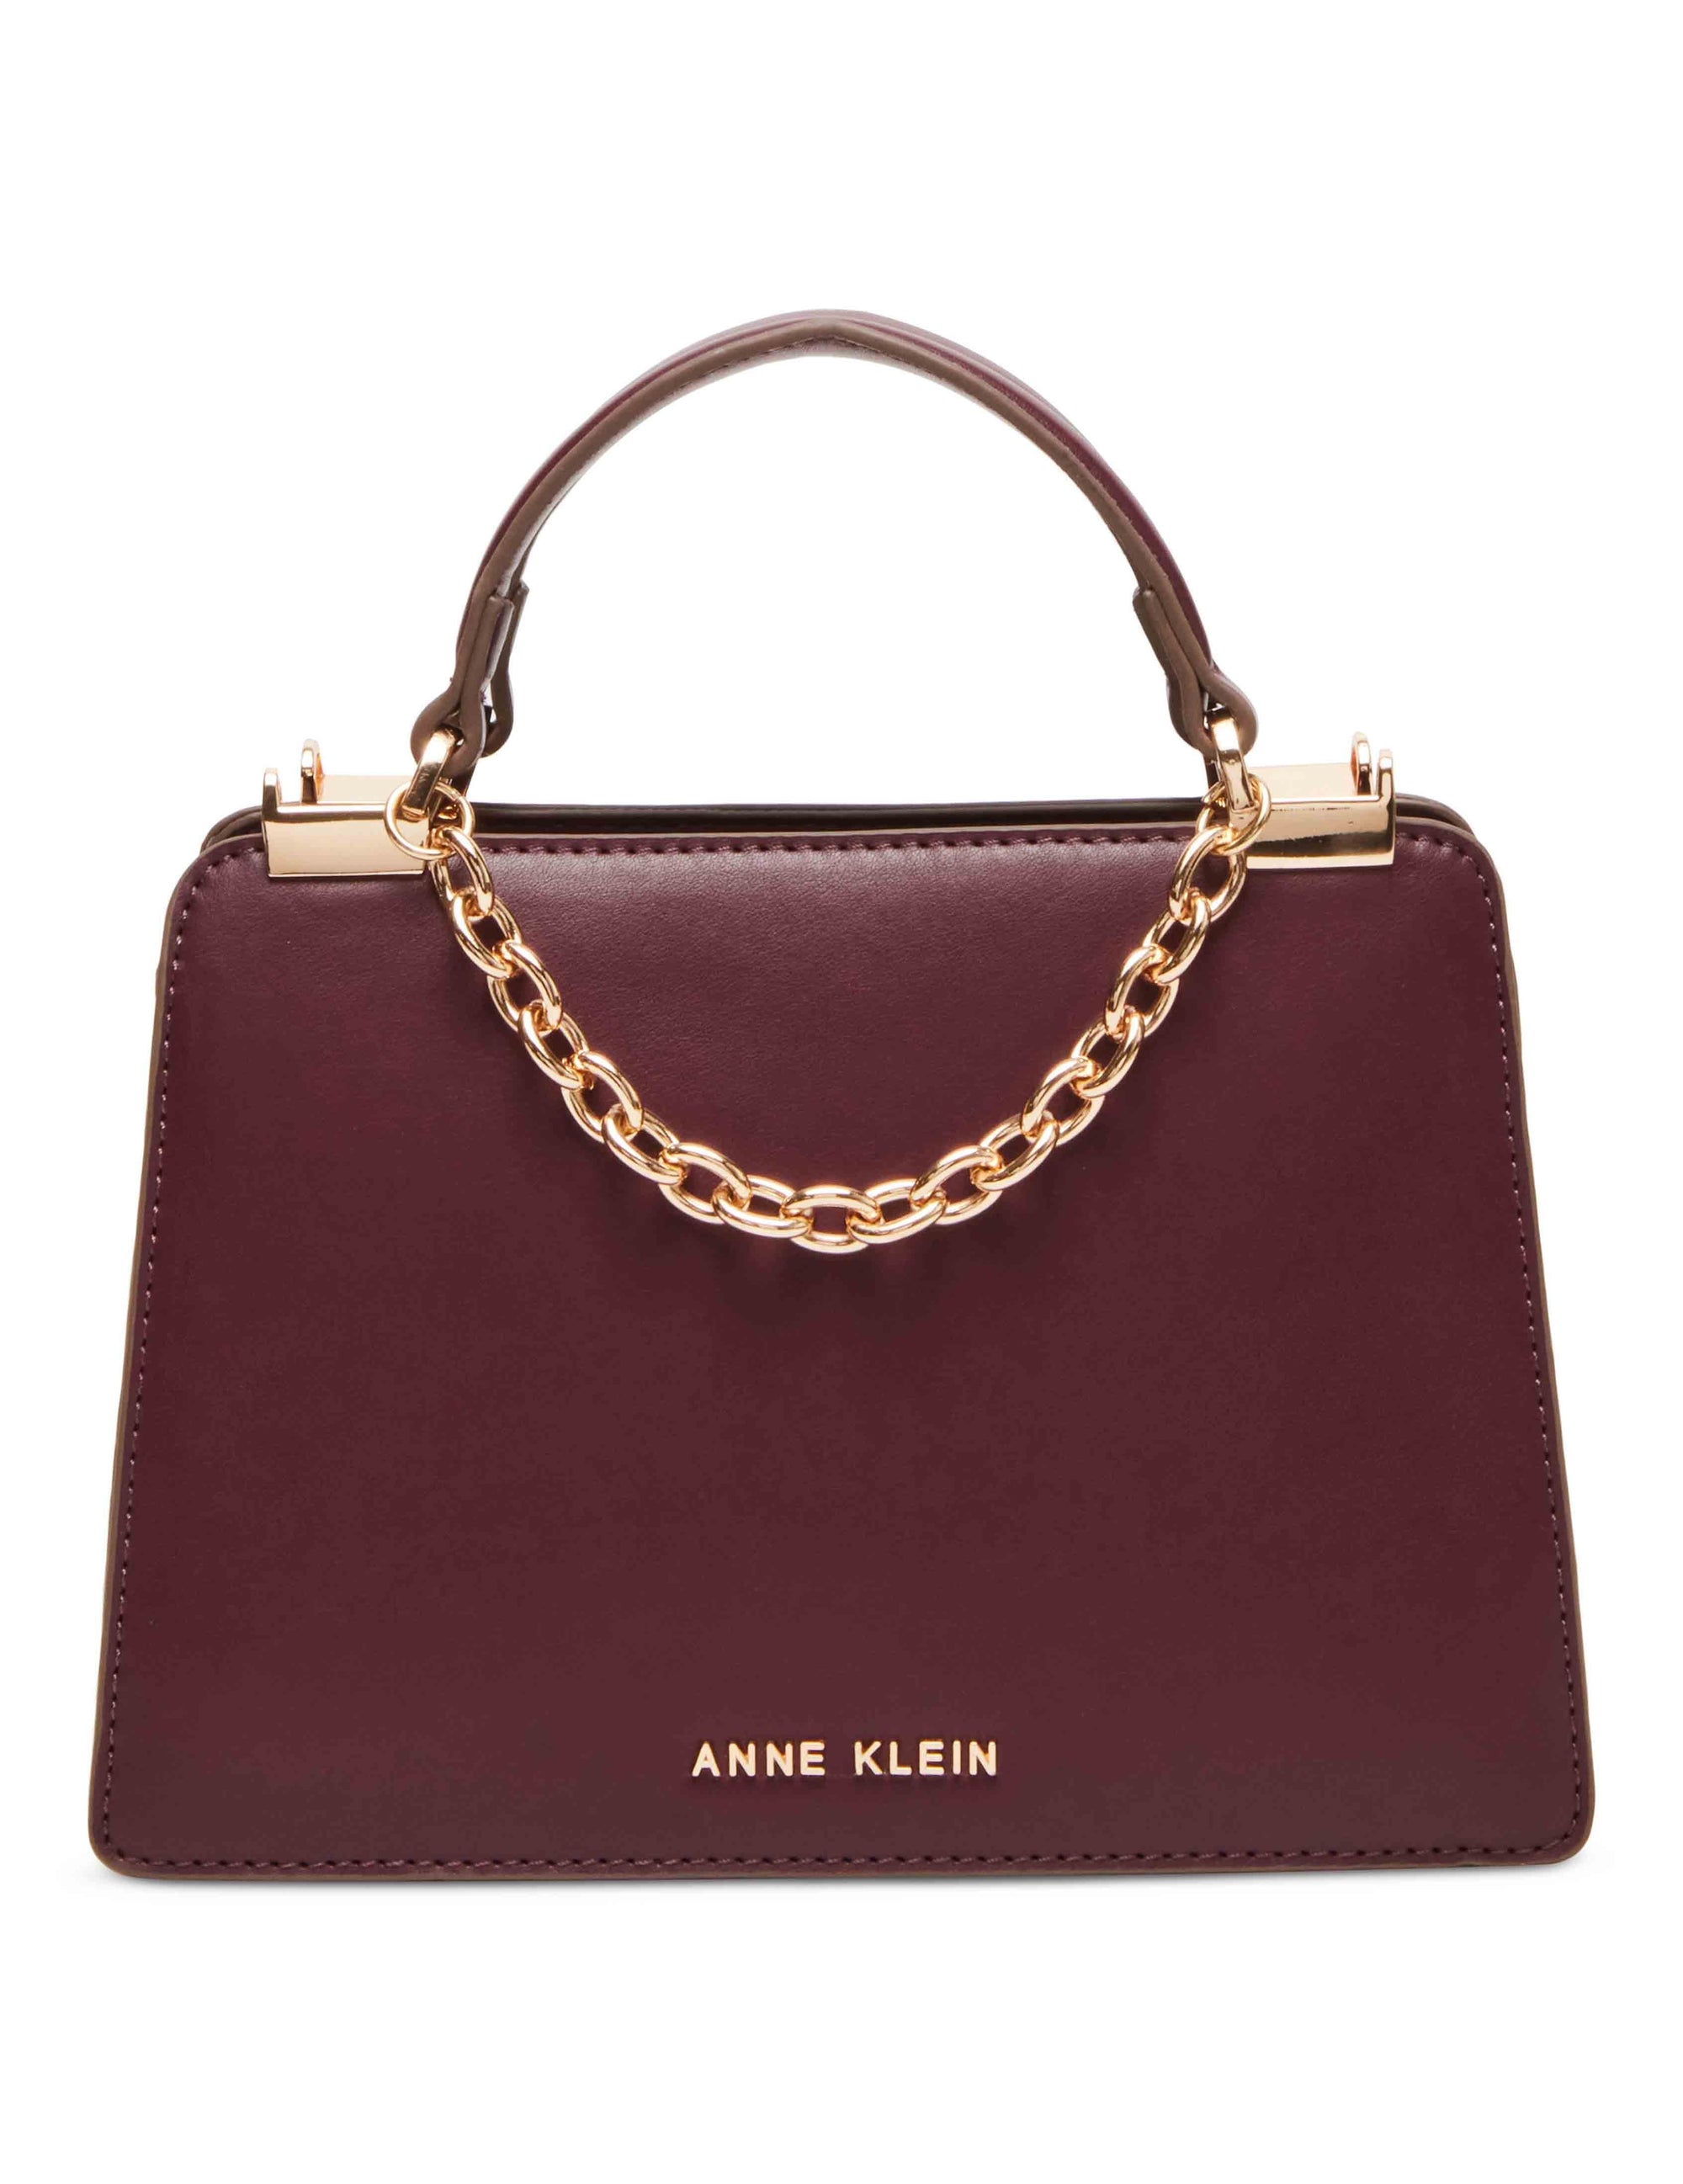 Anne Klein Cranberry/Cranberry Multi Mini Convertible Snake Trimmed Satchel With Swag Chain